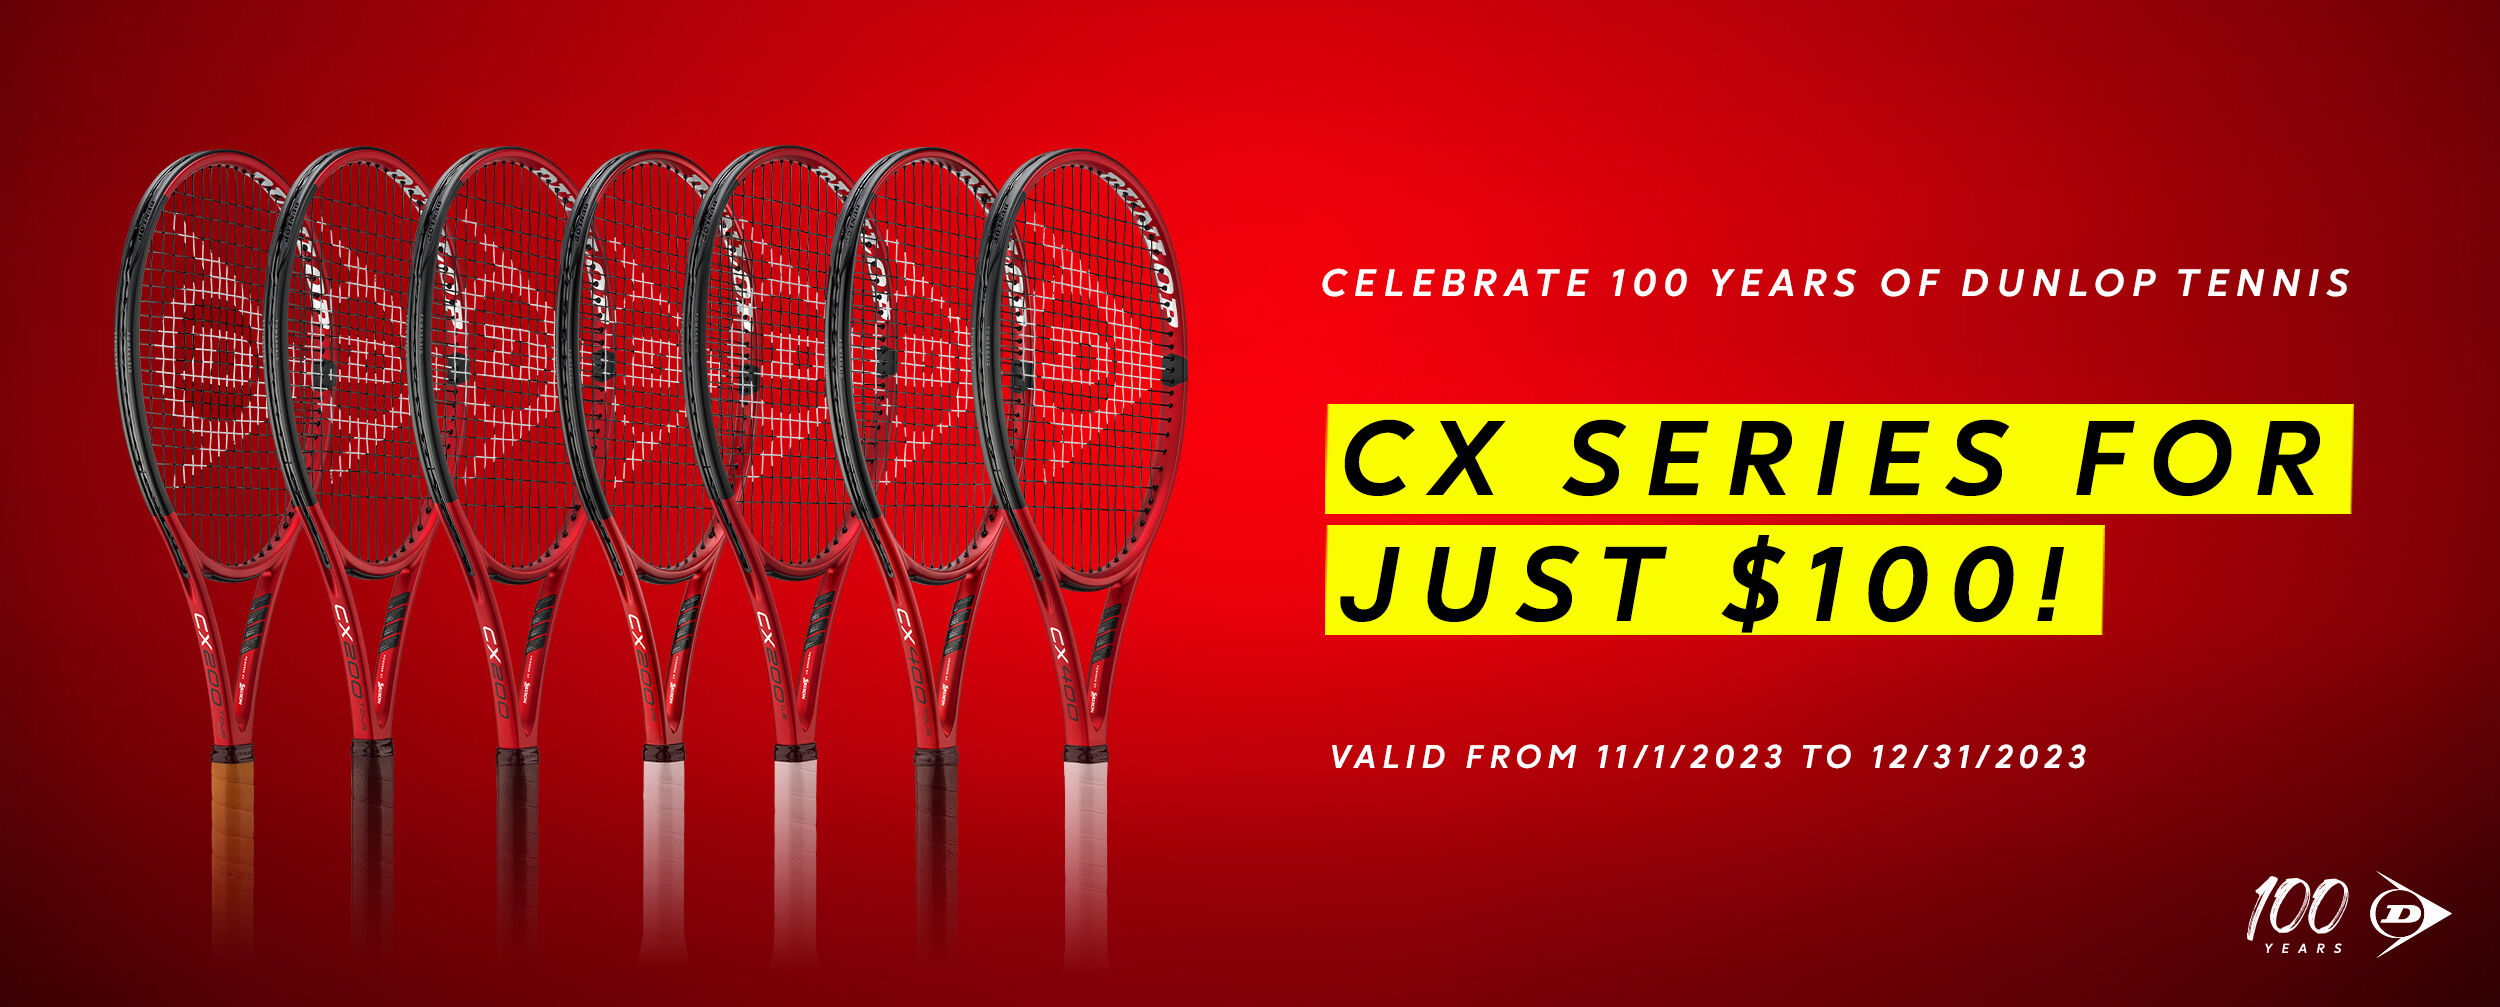 CX SERIES FOR JUST $100